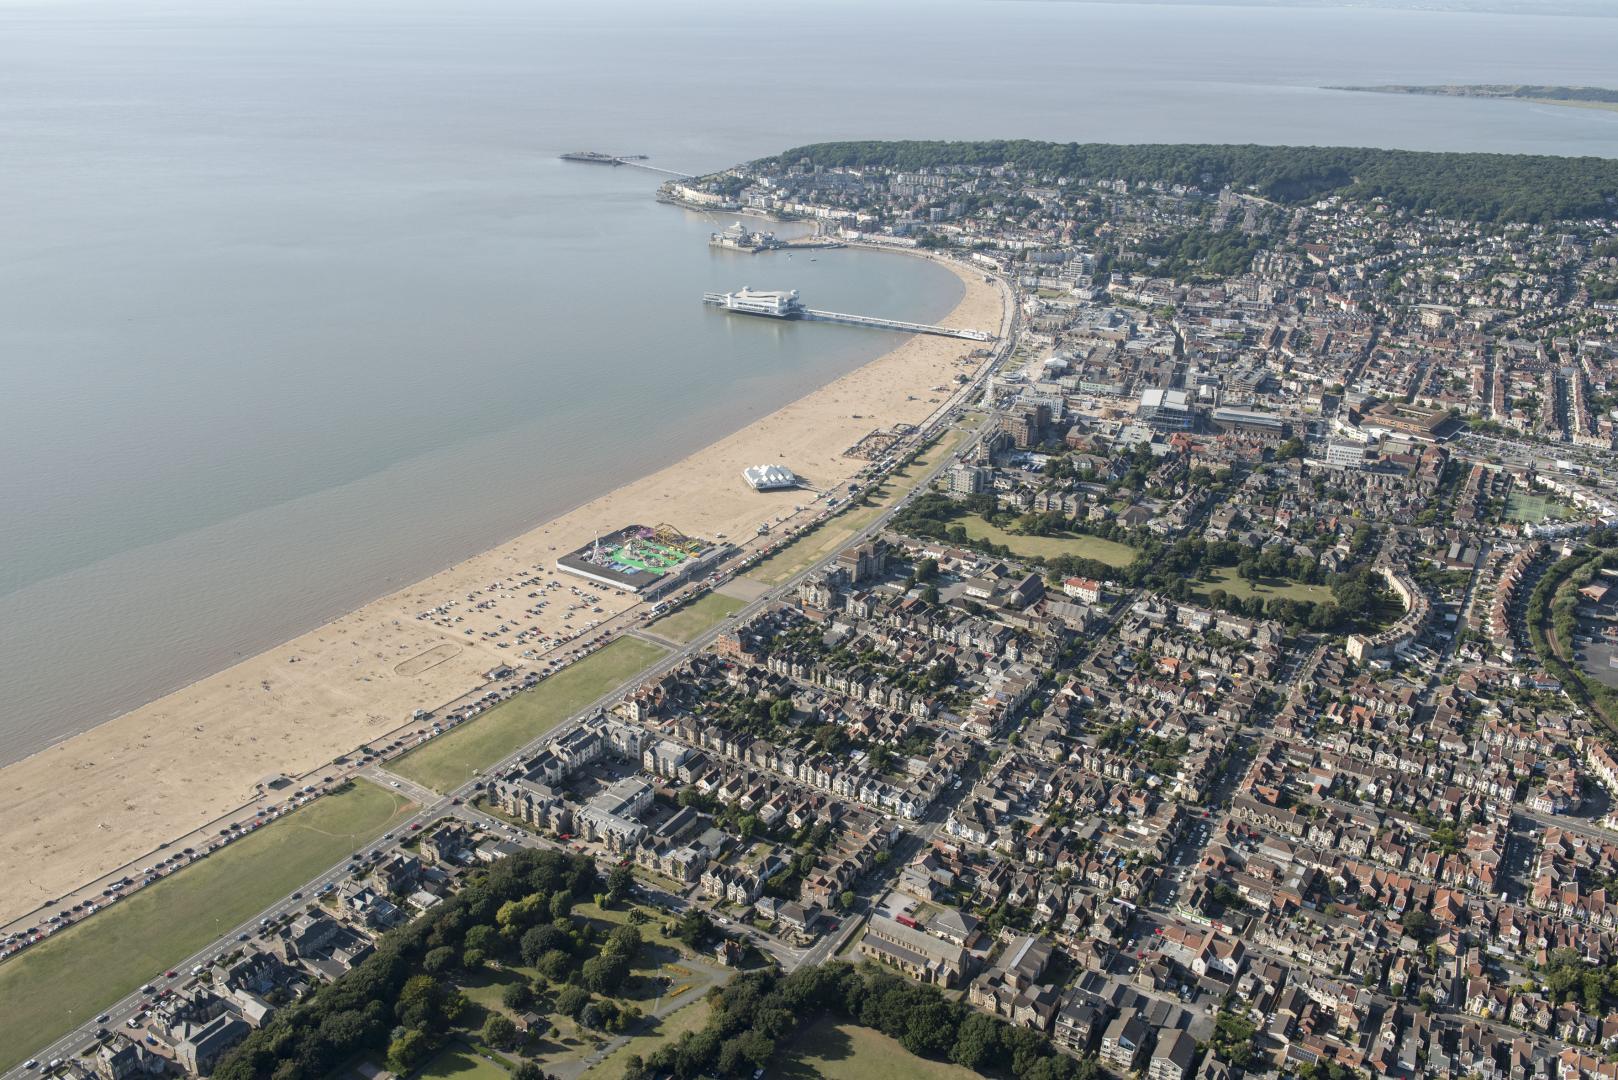 An aerial view of Weston-super-Mare seafront. Photo credit: Historic England